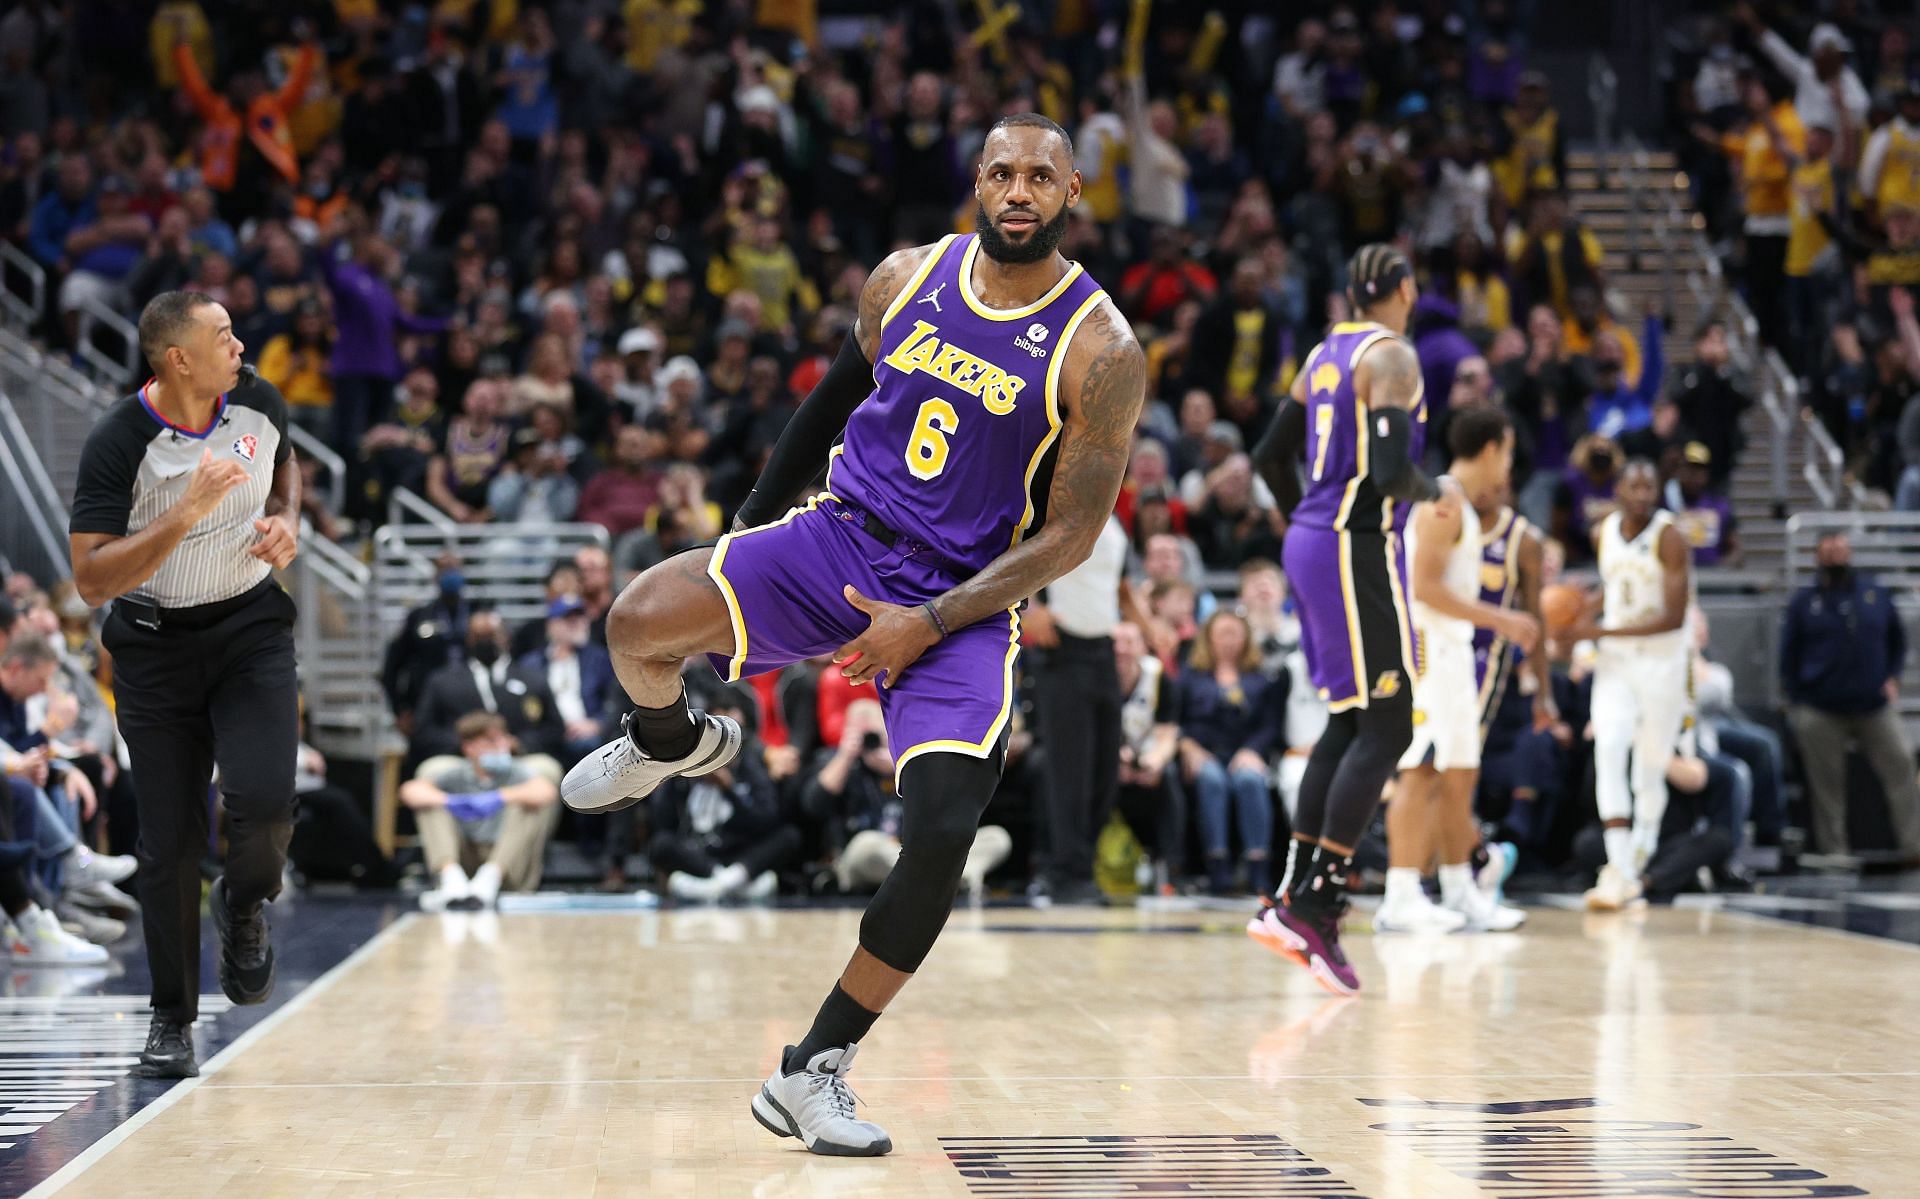 LeBron James of the LA Lakers against the Indiana Pacers